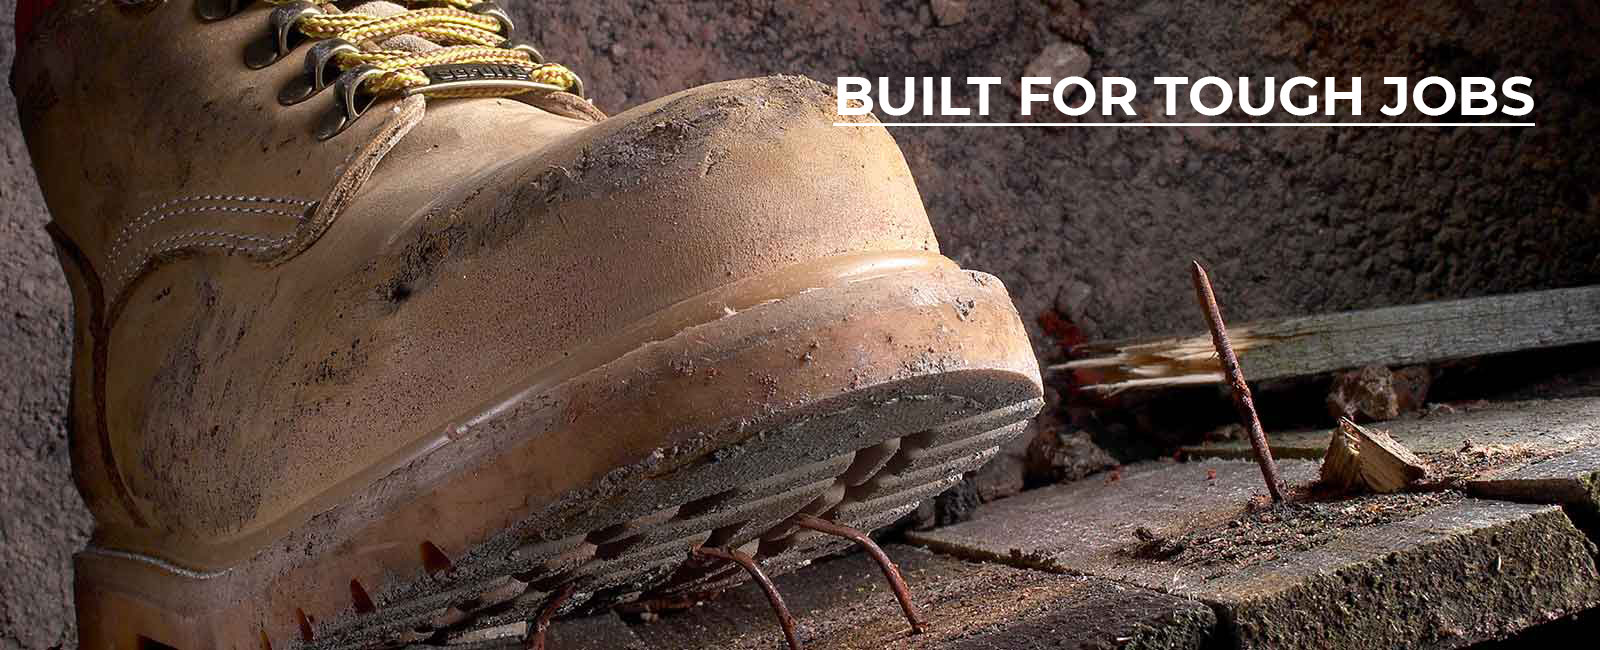 Safety Shoes Manufacturers/Suppliers/Dealers/Exporters in Chennai